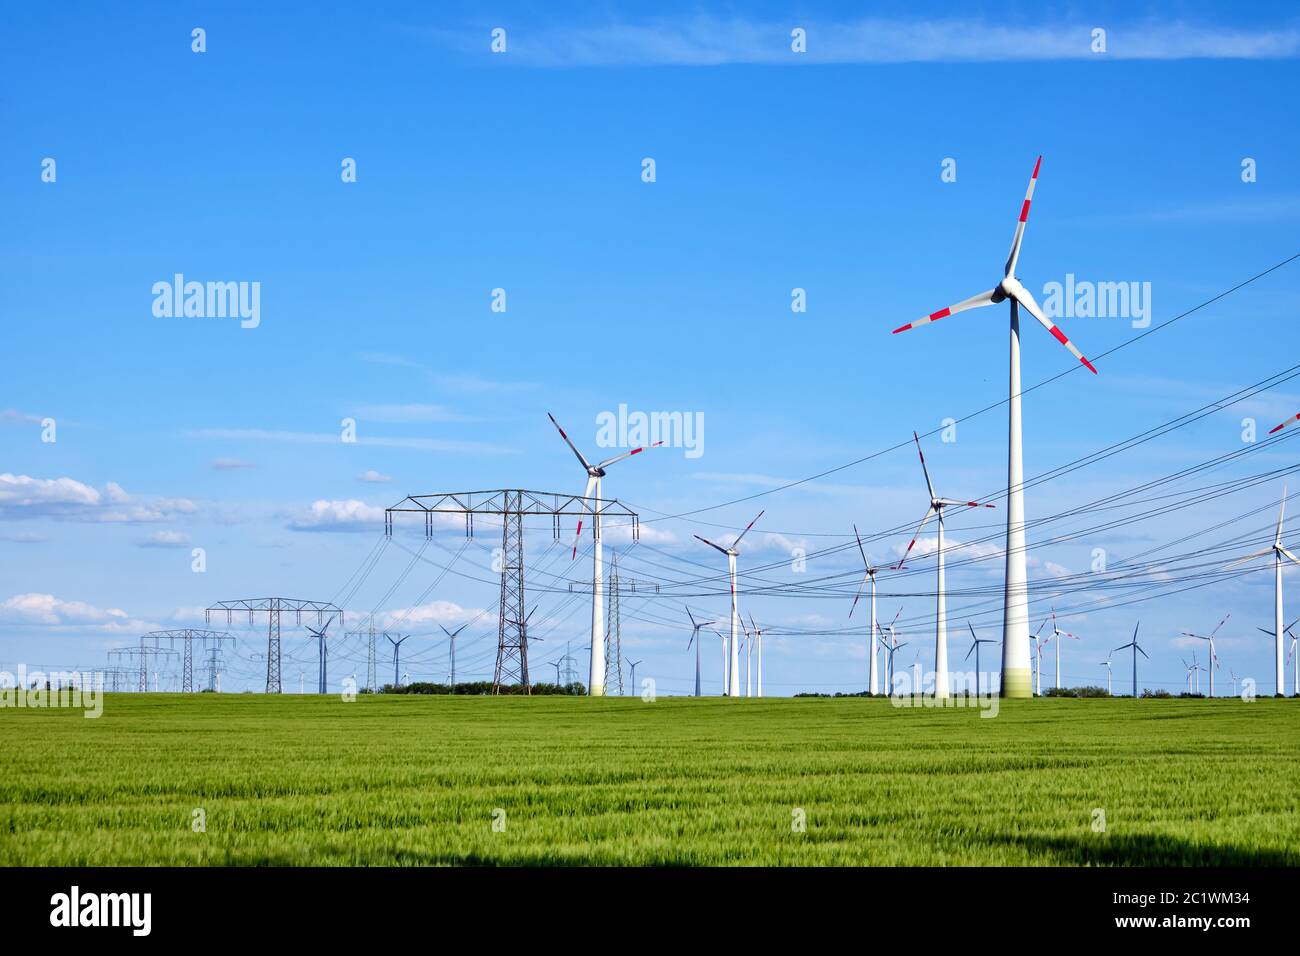 Wind turbines and power lines in a corn field in rural Germany Stock Photo